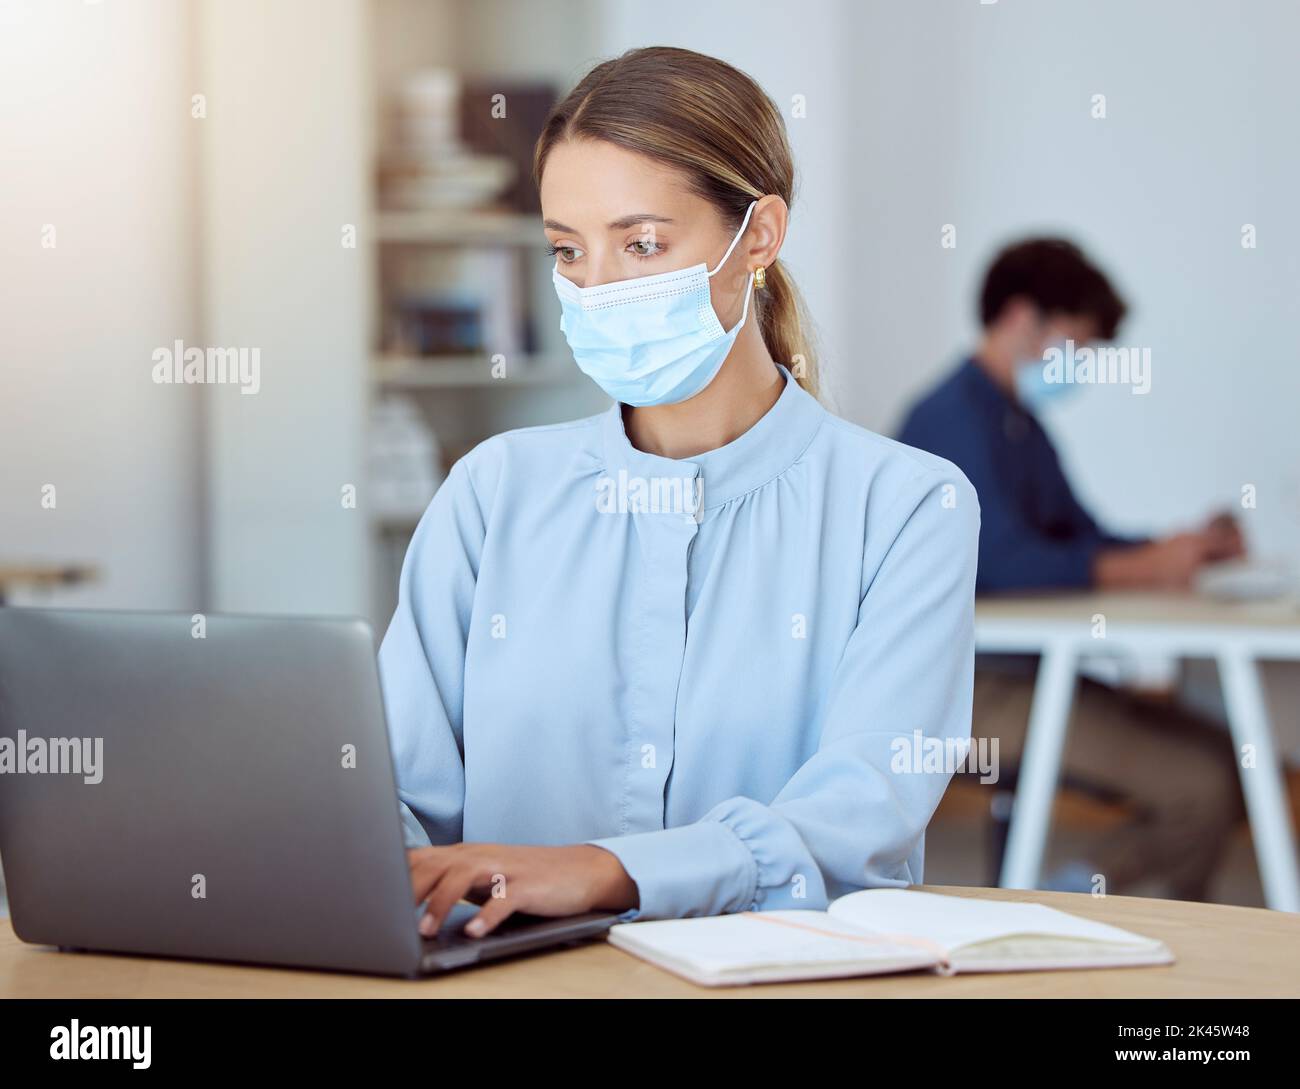 Laptop, face mask and corporate employee working on a project while sitting at a desk in the office. Professional woman typing company documents on Stock Photo